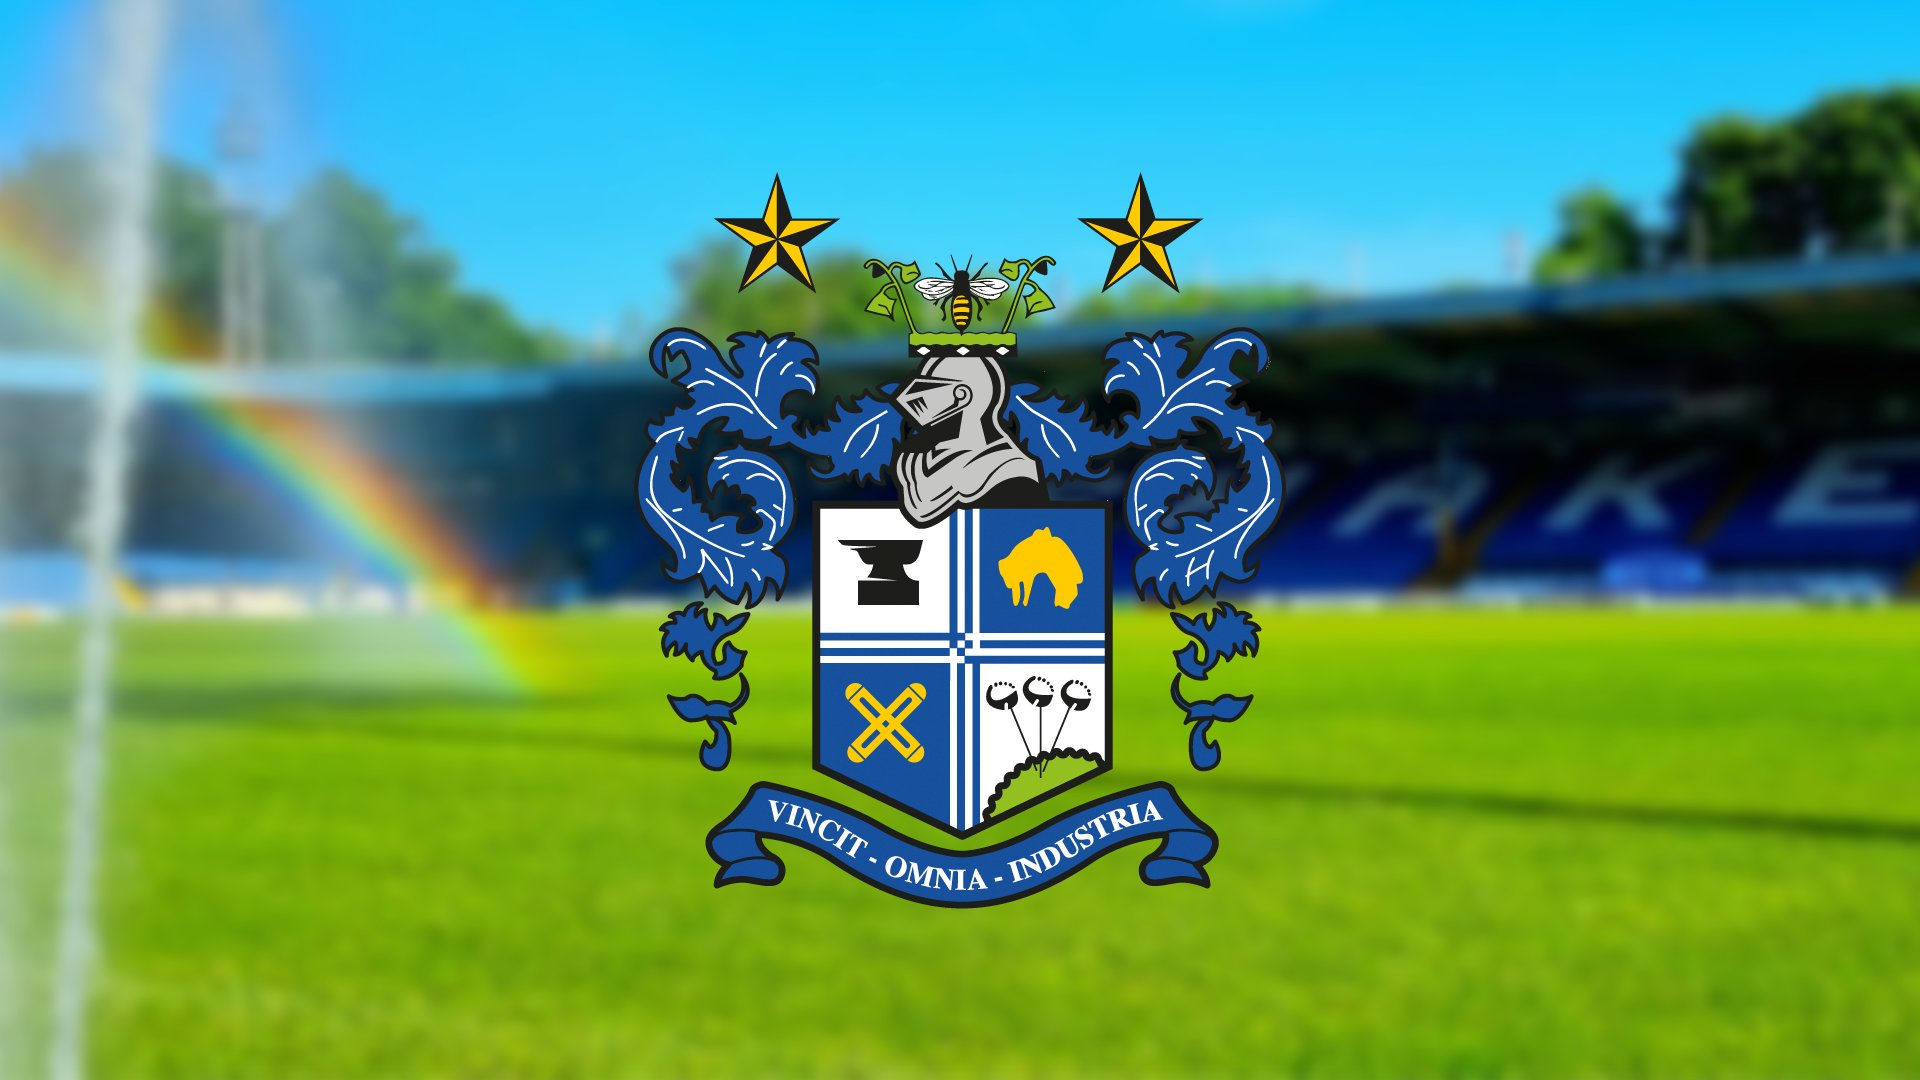 More information about "The Football Supporters' Society of Bury Update"